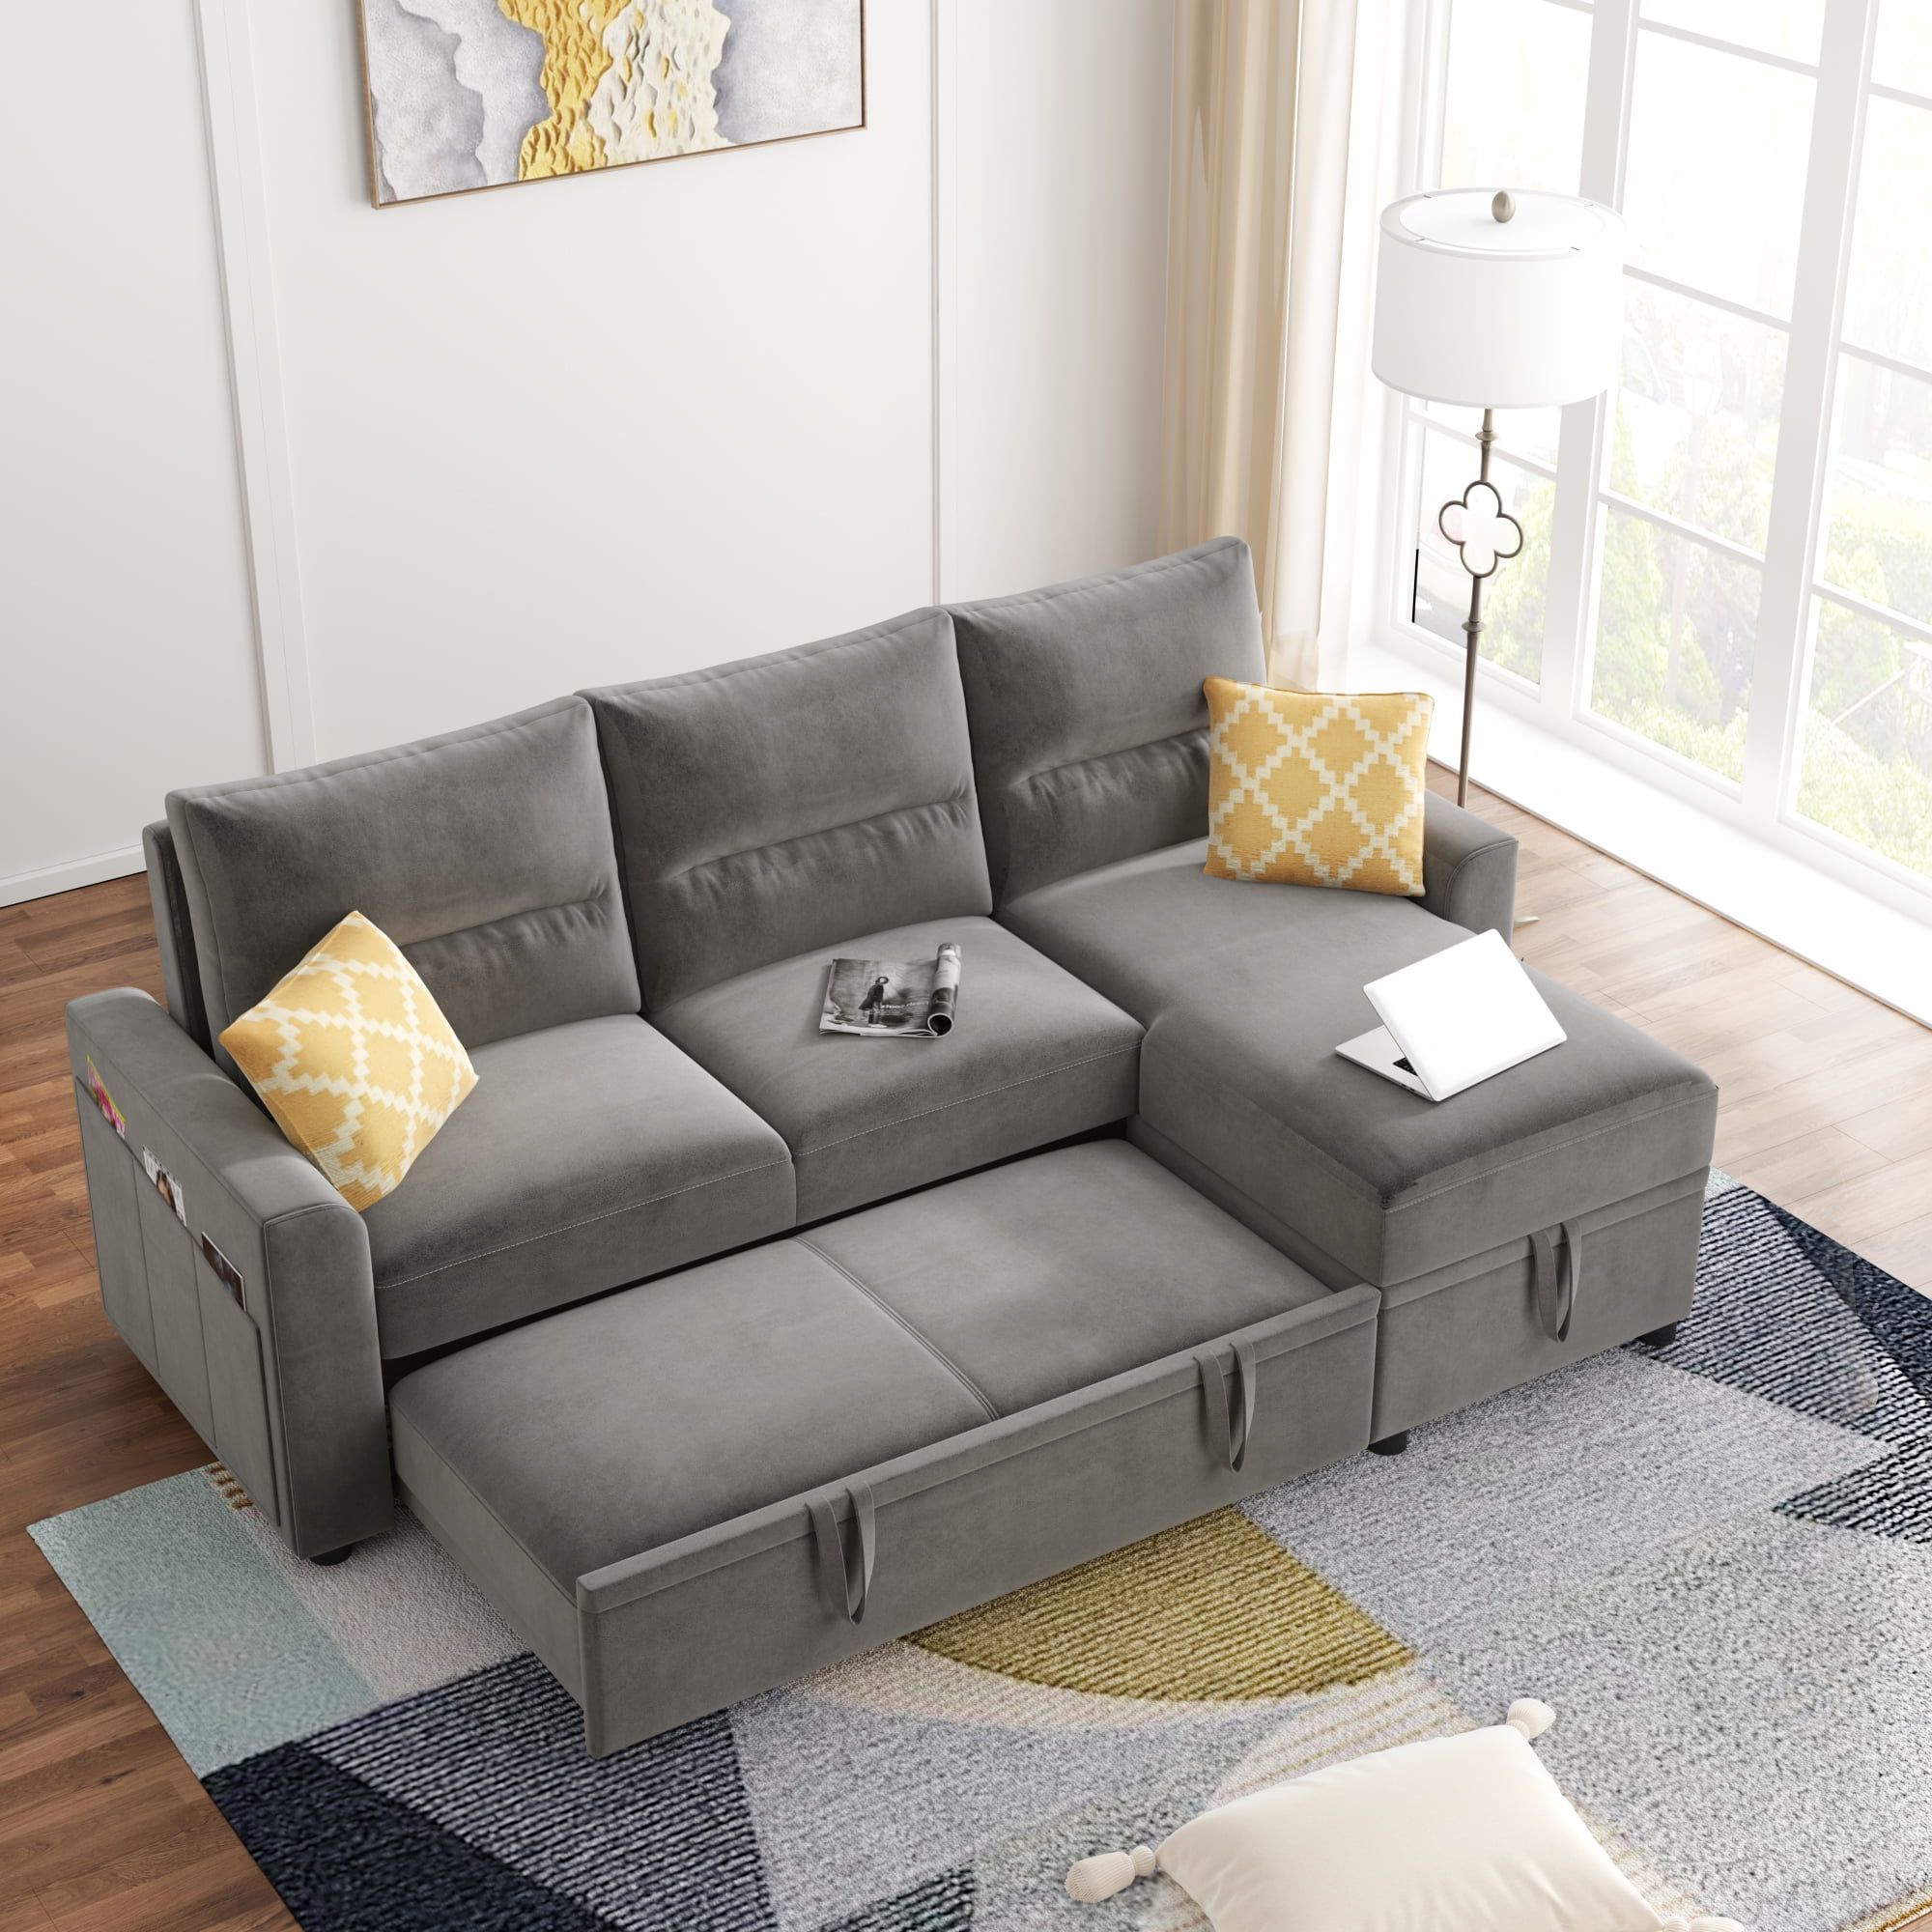 Latest 3 In 1 Gray Pull Out Sleeper Sofas Inside Upholstered Sectional Sleeper Sofa, Segmart  (View 7 of 15)